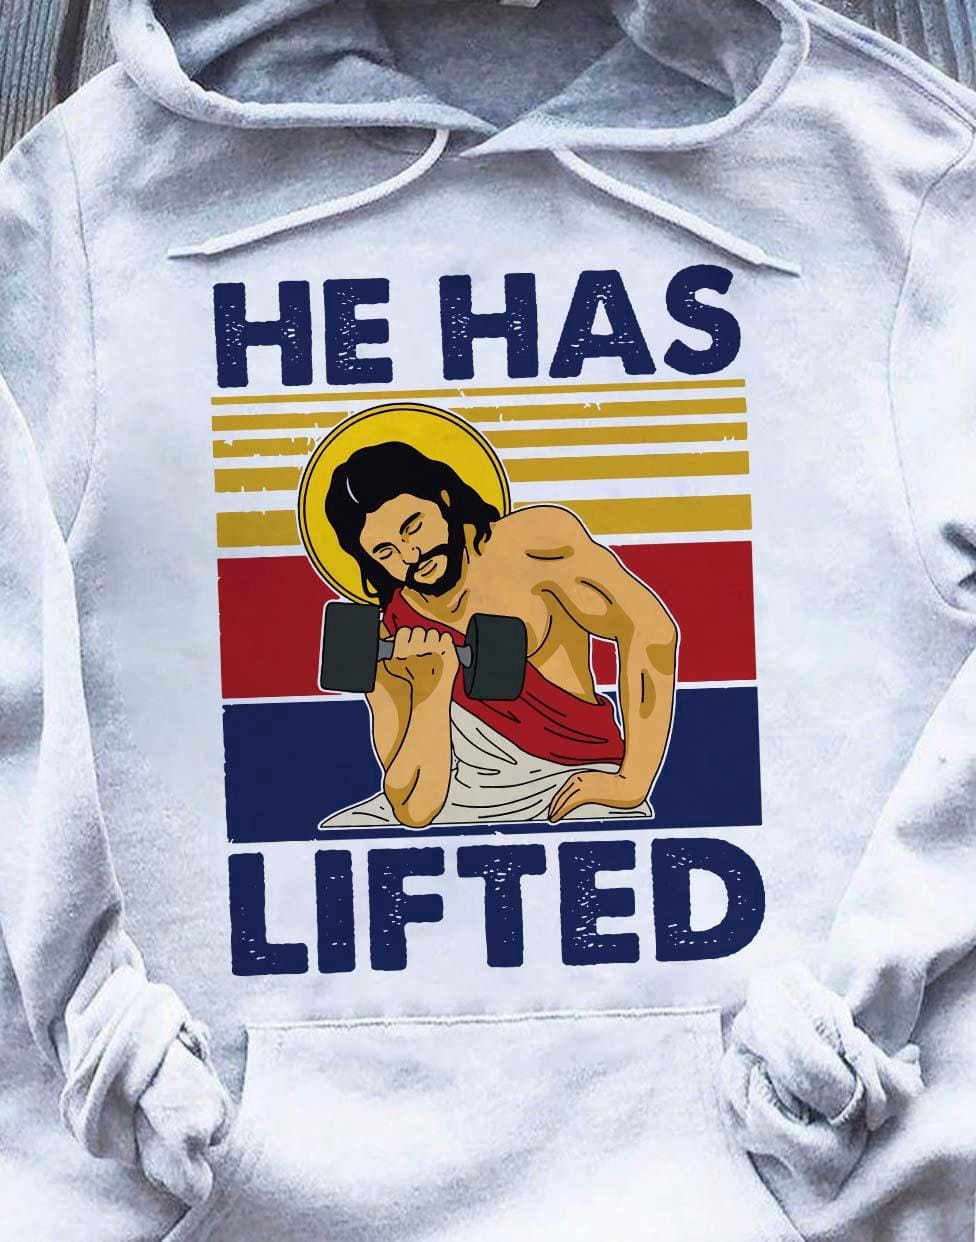 He has lifted - Jesus lifting weight, Gift for bodybuilder